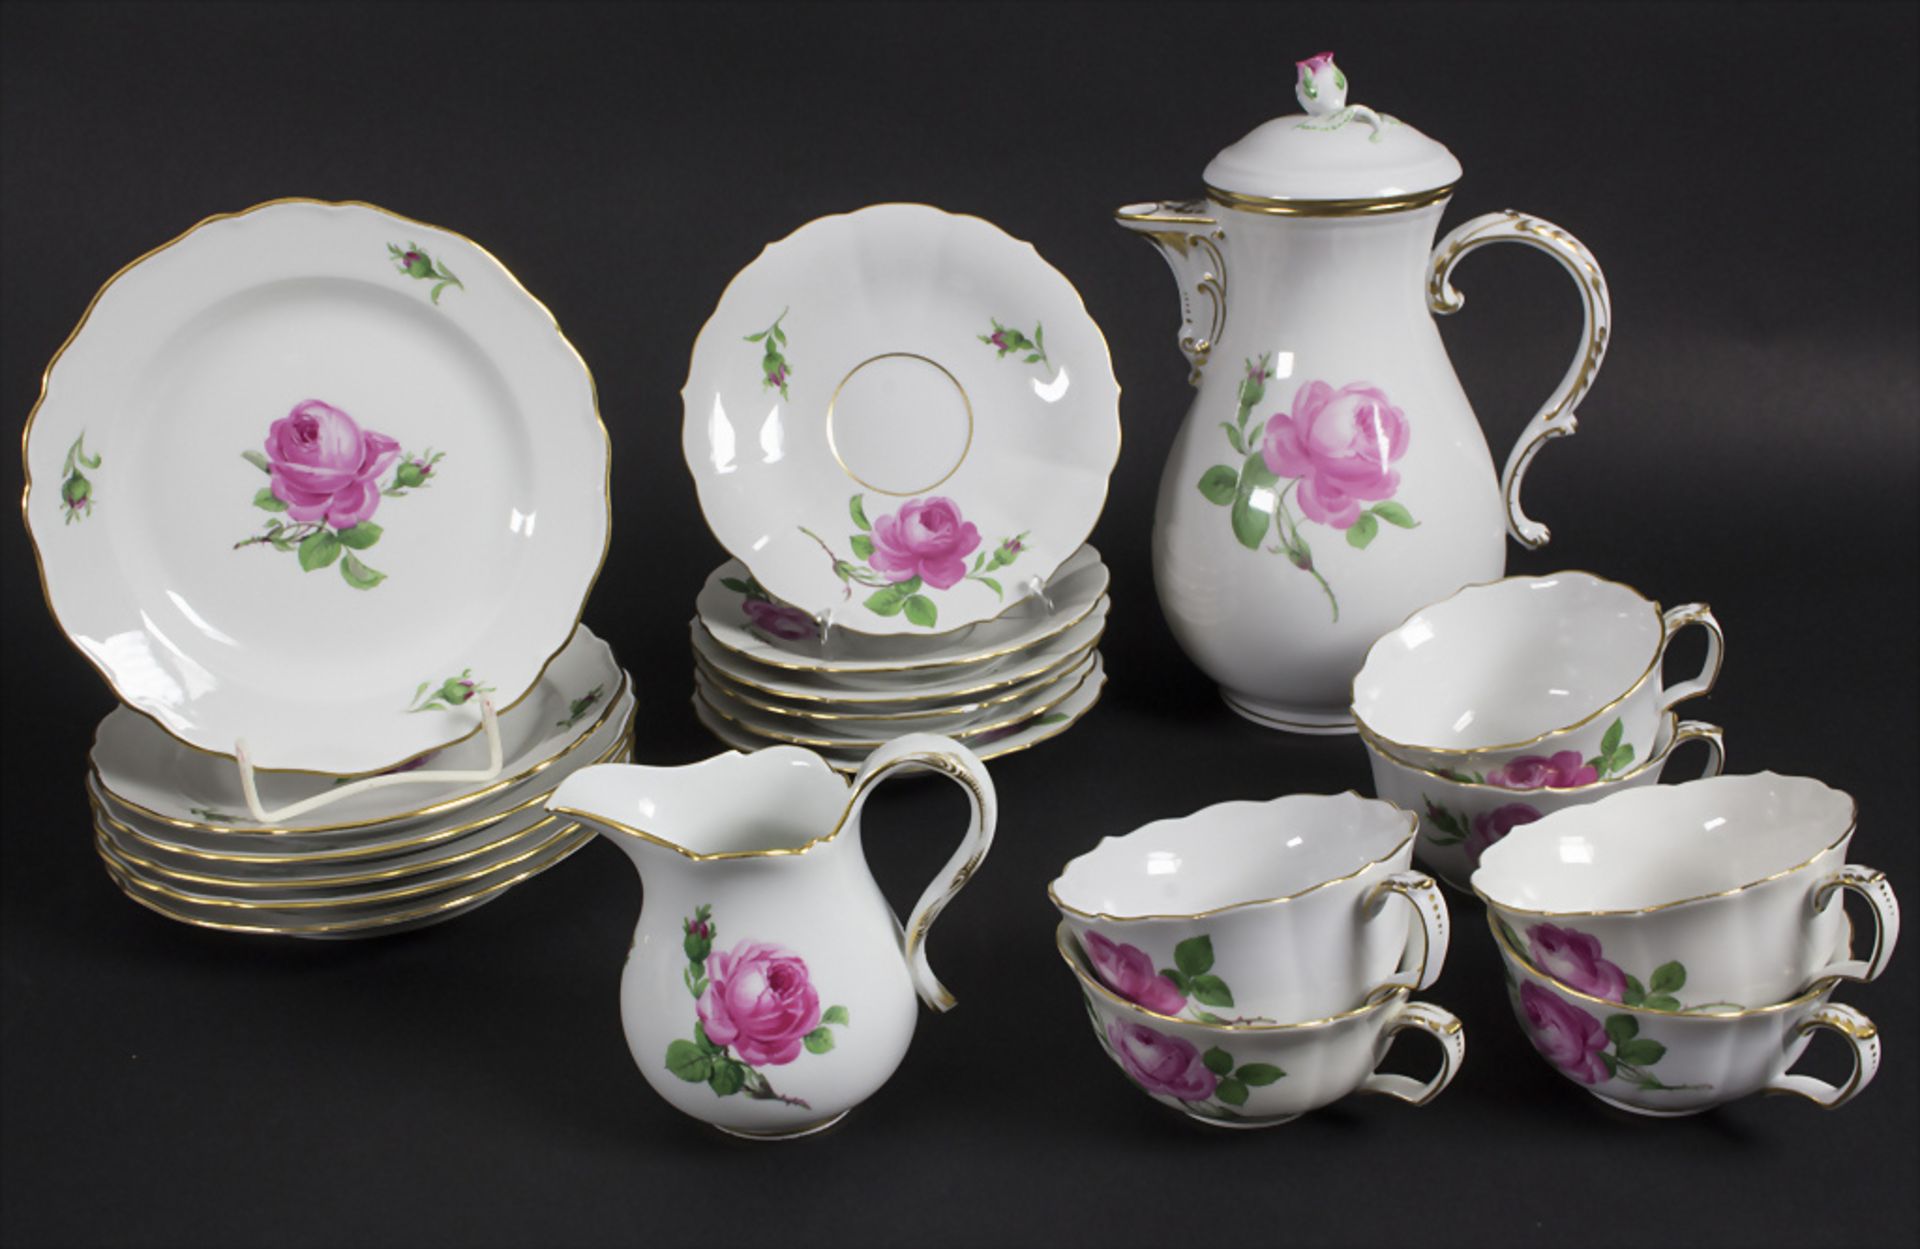 20 tlg. Kaffeeservice 'Rote Rose' / A 20-piece coffee set with rose decor, Meissen, Anfang 20. Jh.